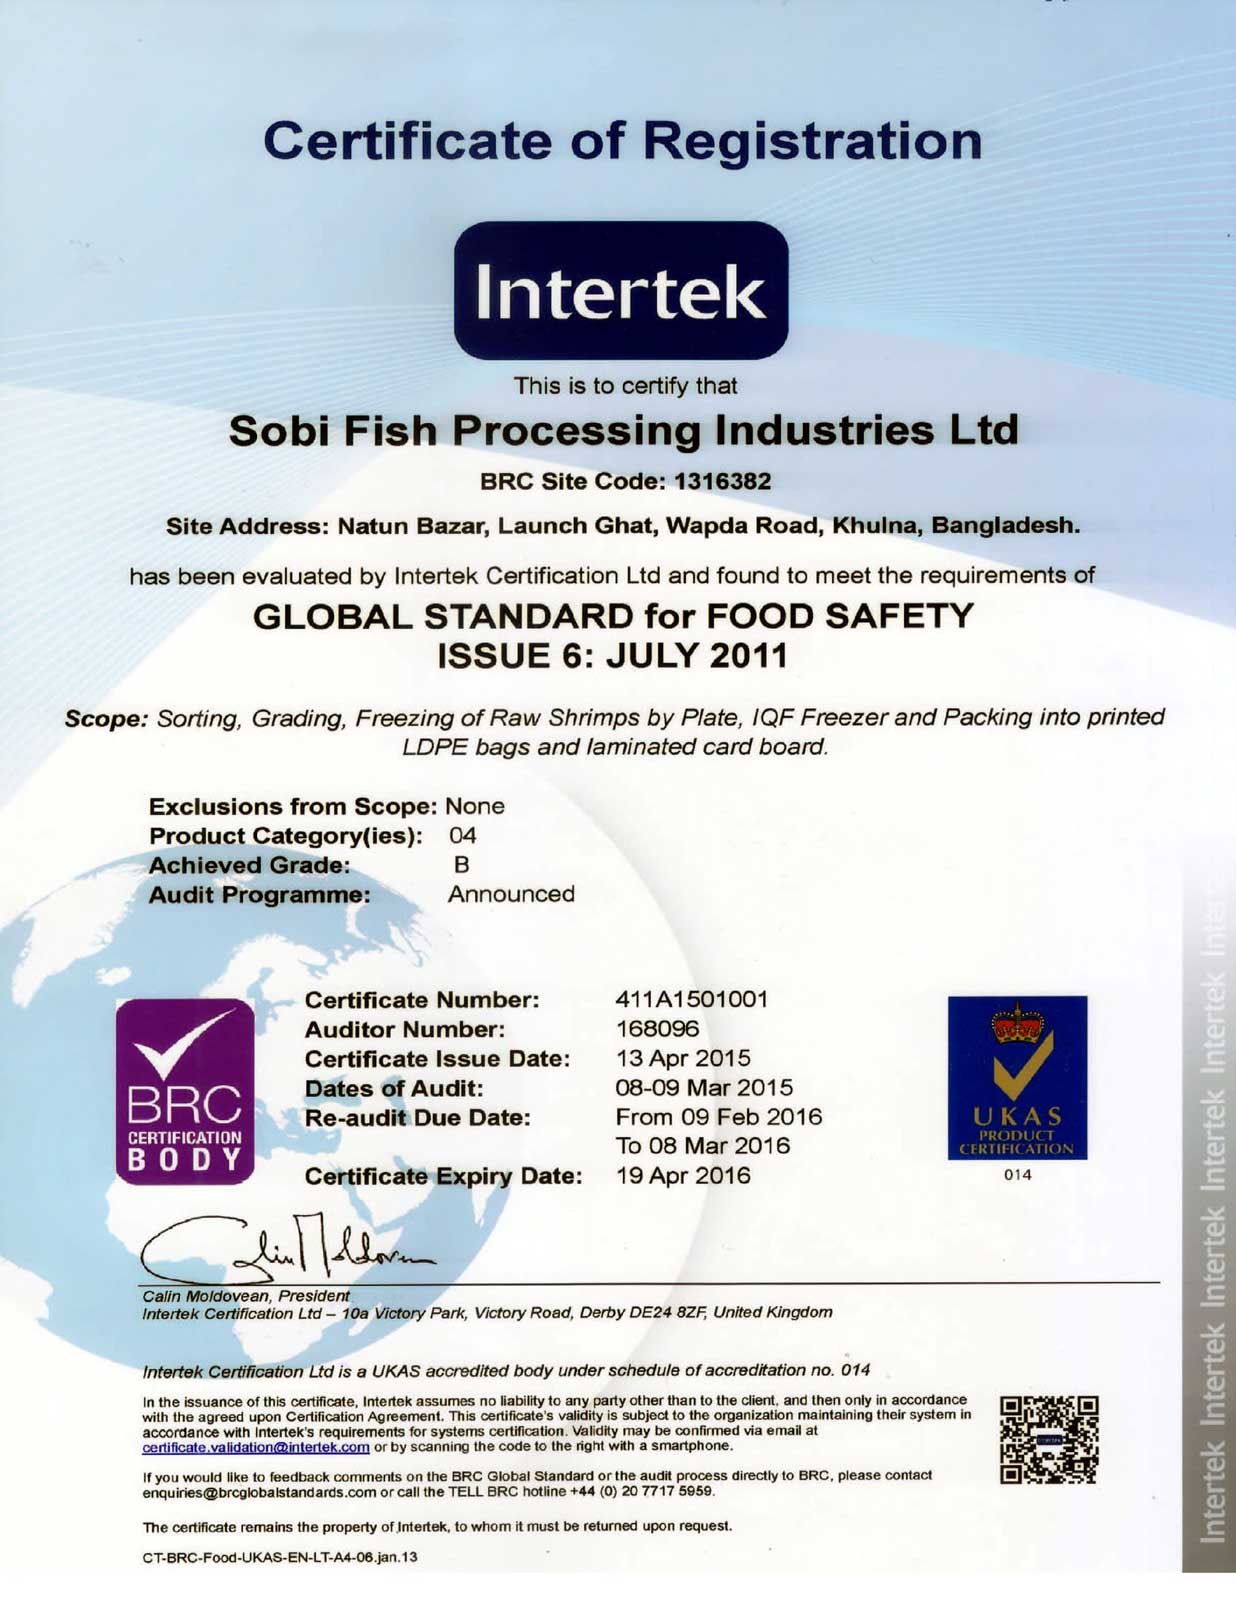 GLOBAL STANDARD for FOOD SAFETY Certificate from BRC UKAS Sobi Fish